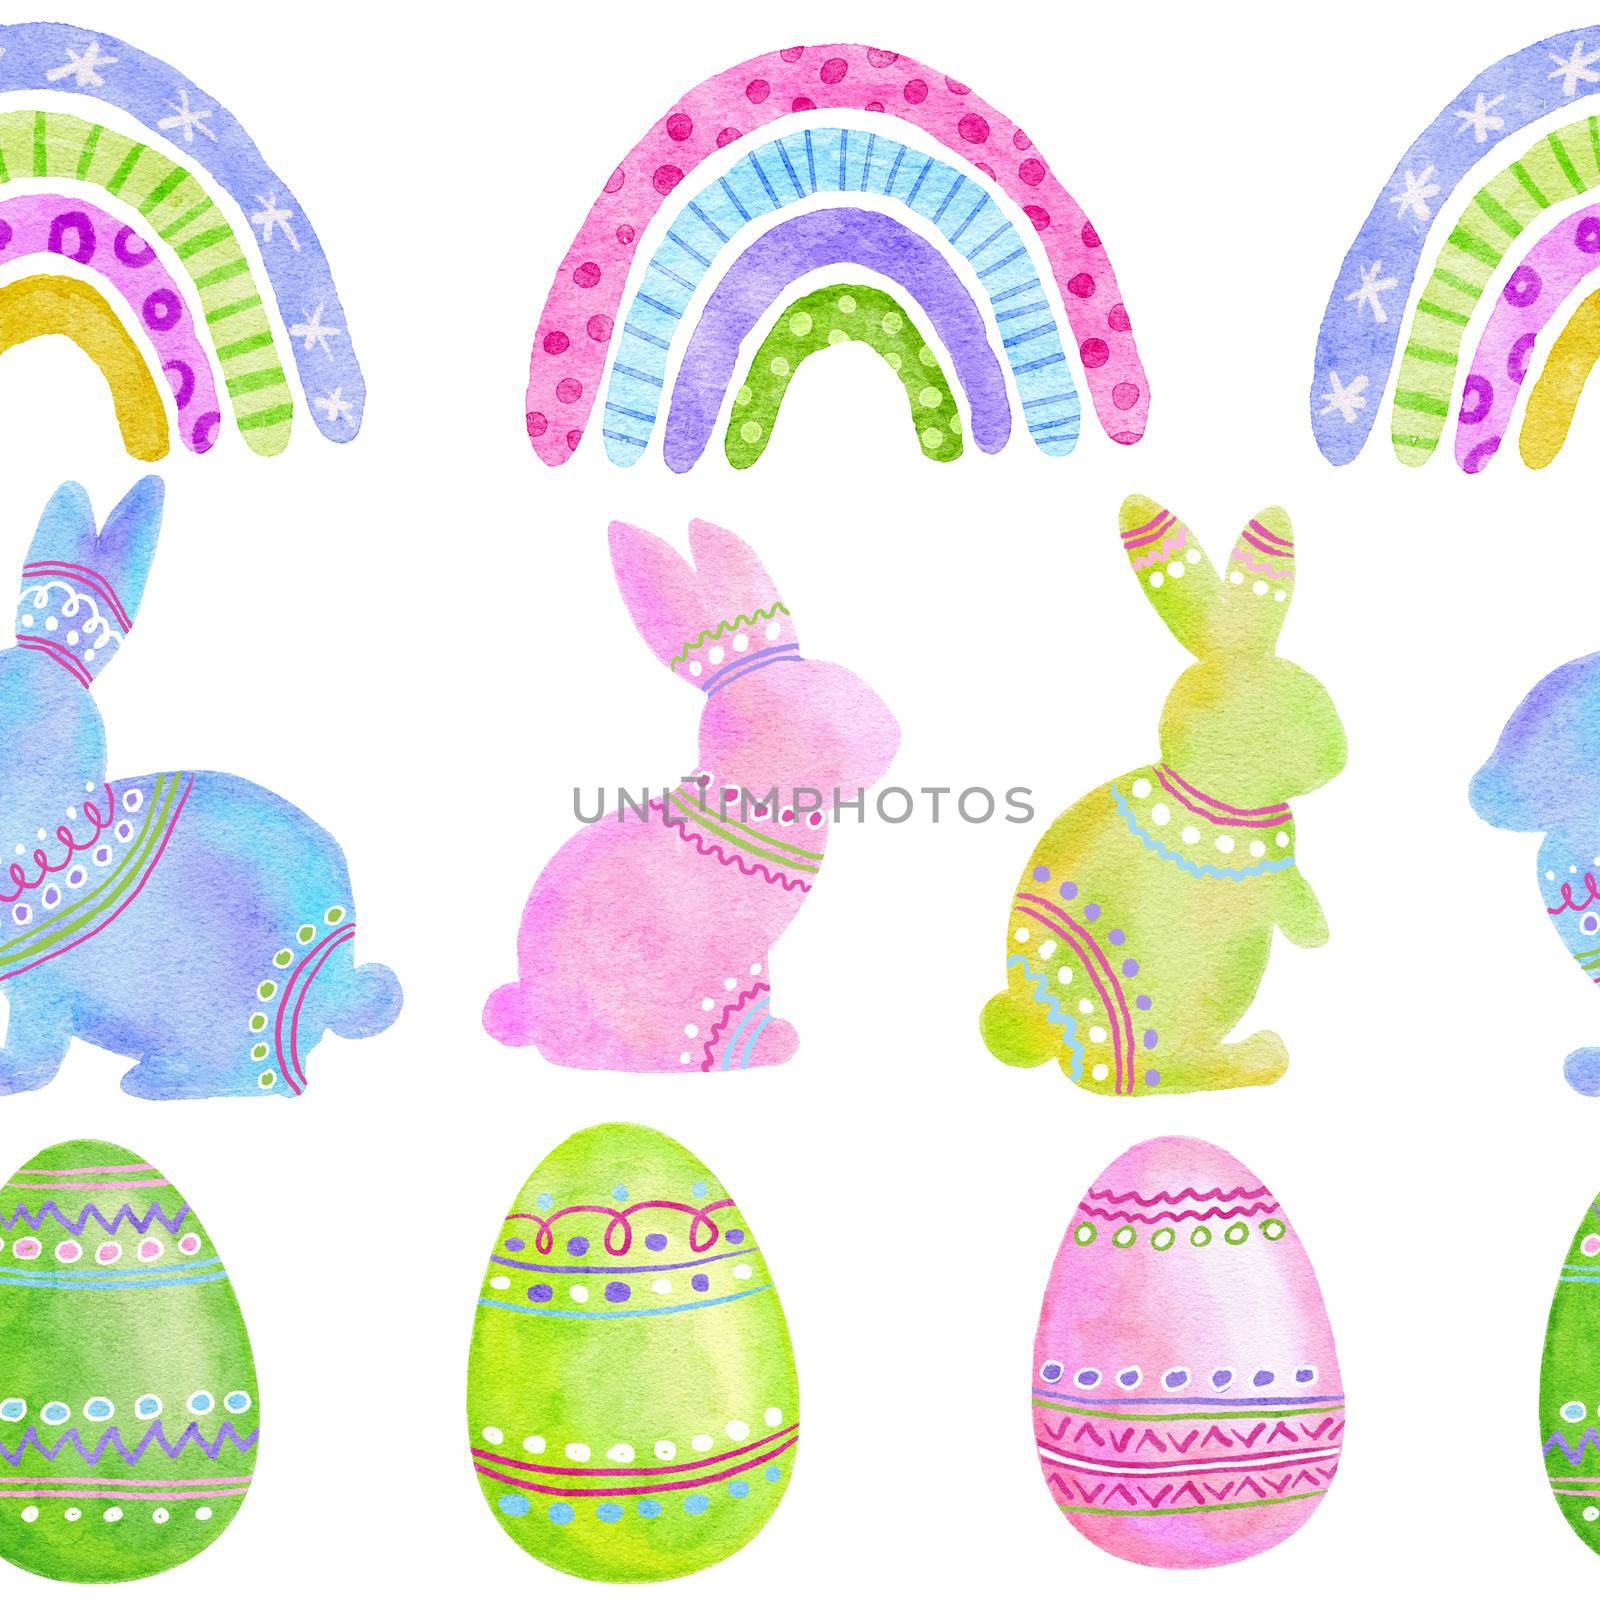 Watercolor seamless hand drawn pattern with Easter eggs bunnies rabbit raibows in pastel pink green blue colors. Spring april background for party decor wrapping paper textile